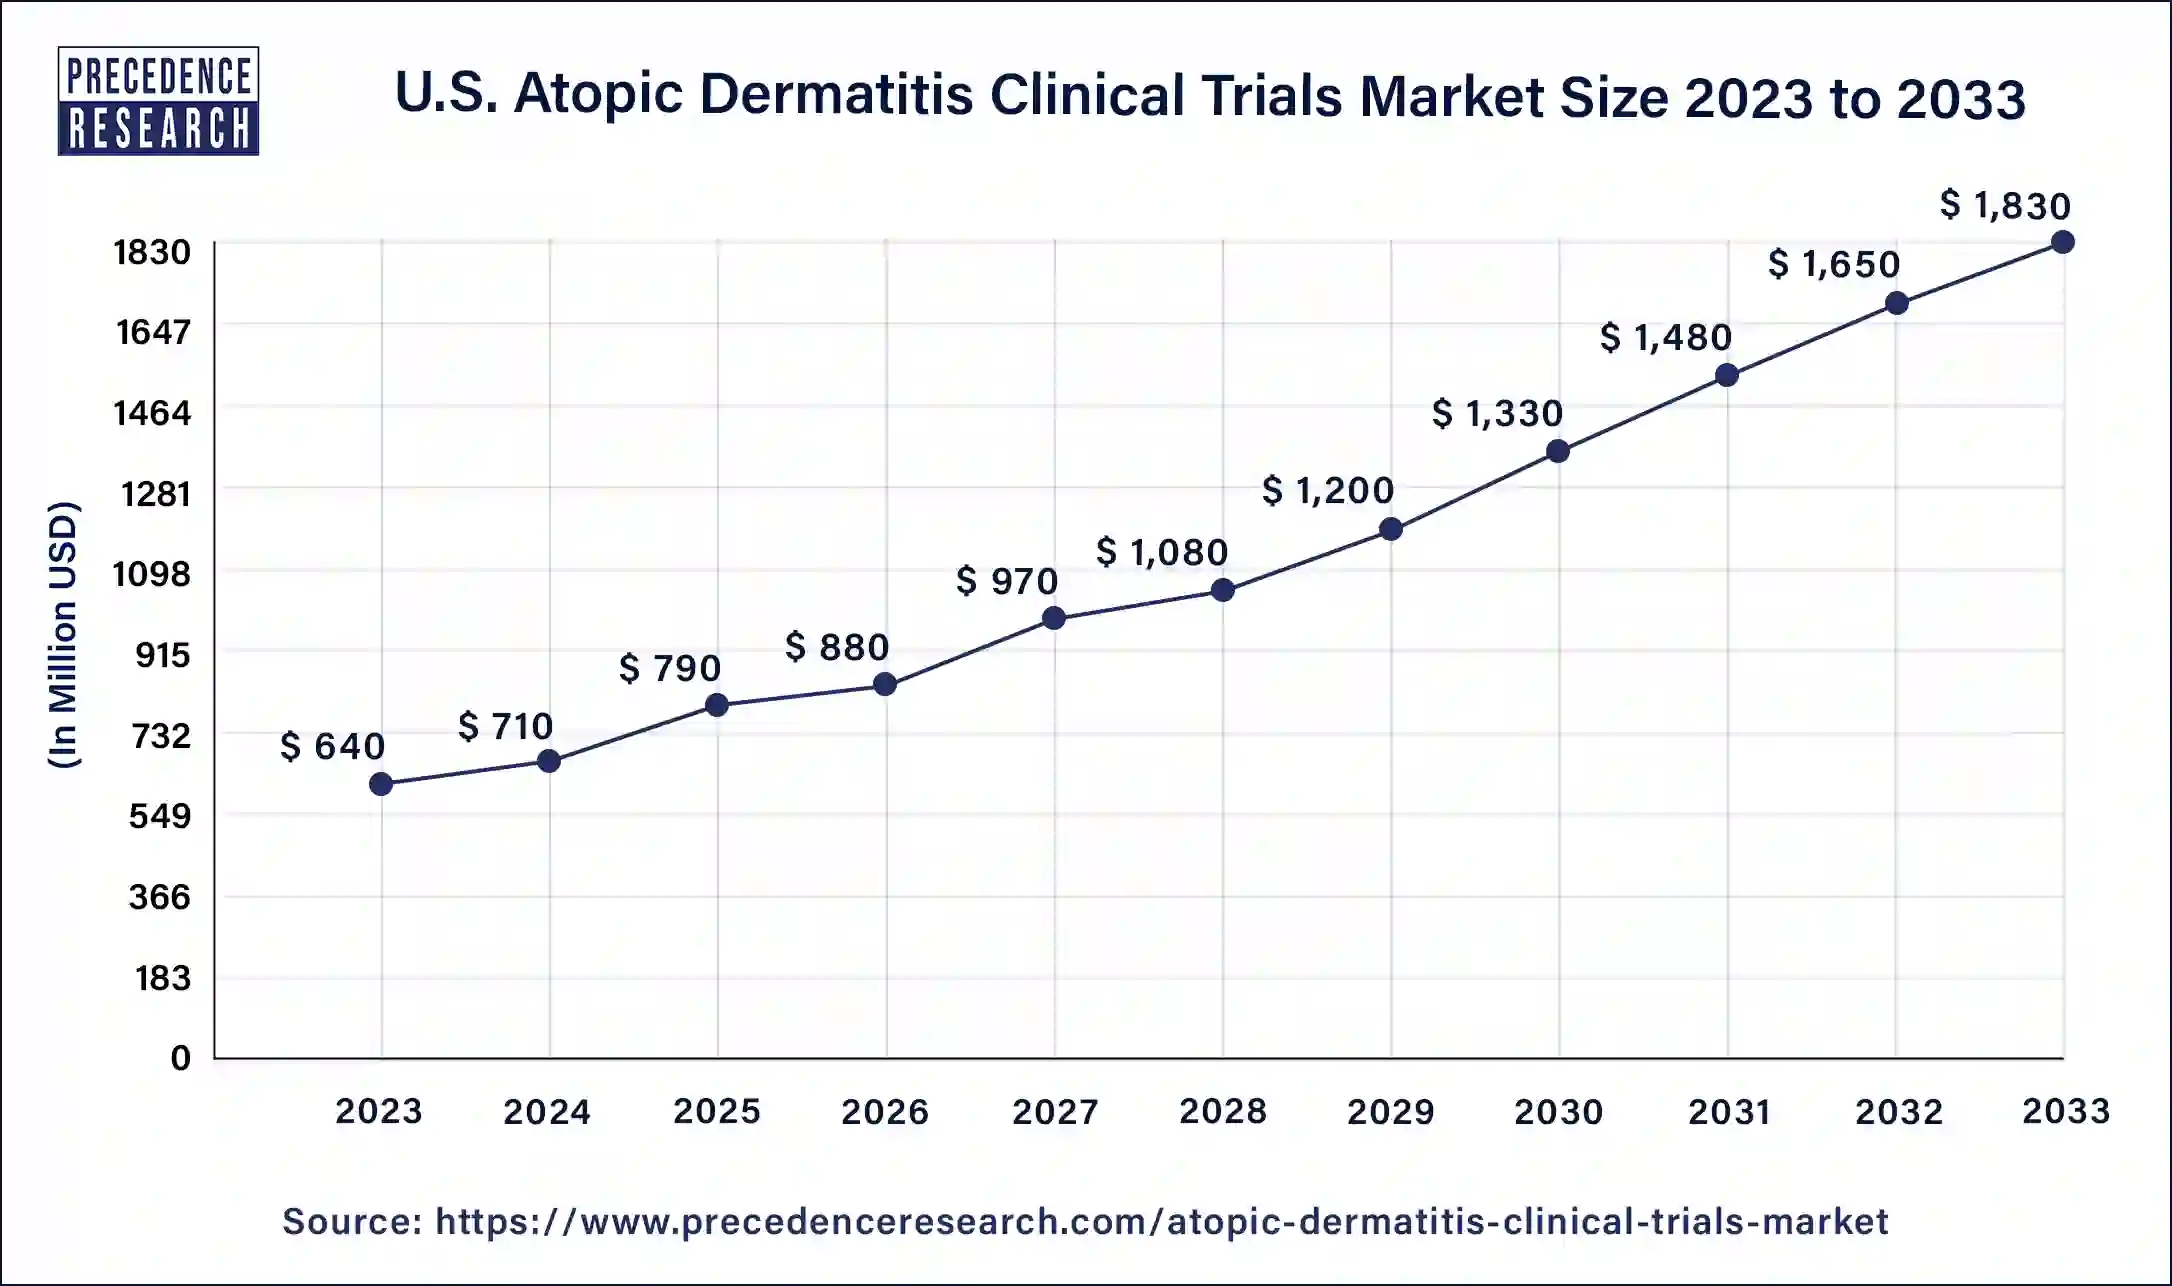 U.S. Atopic Dermatitis Clinical Trials Market Size 2024 to 2033